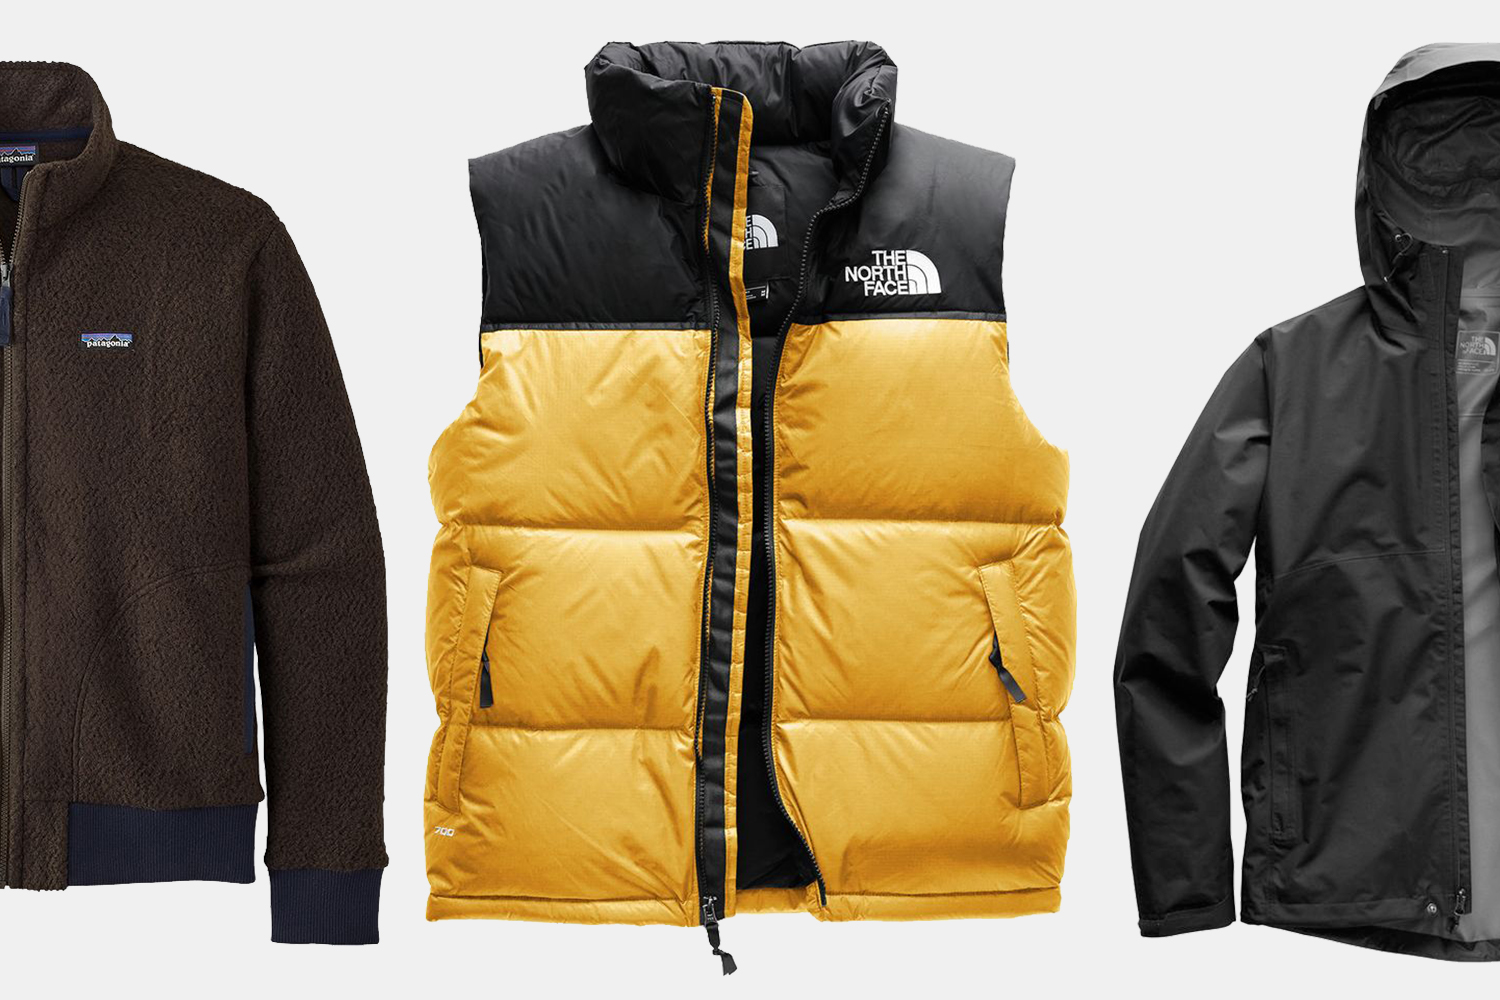 The North Face rain jacket and vest, Patagonia fleece